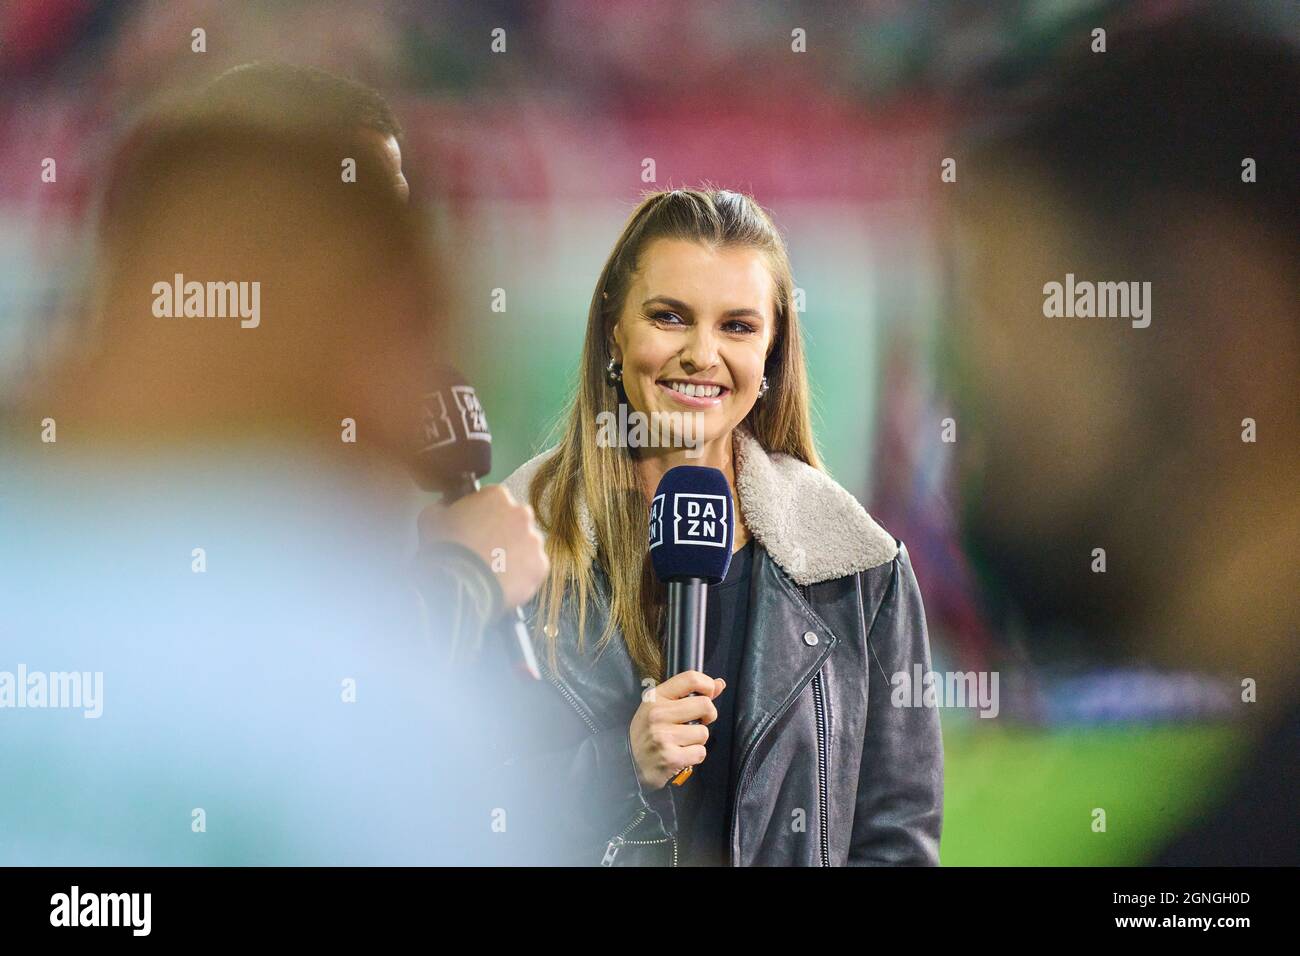 Laura WONTORRA, sports presenter, reporter, woman, moderator, TV,  television, DAZN in the match SpVgg GREUTHER FÜRTH - FC BAYERN MUENCHEN 1-3  1.German Football League on September 24, 2021 in Fuerth, Germany. Season